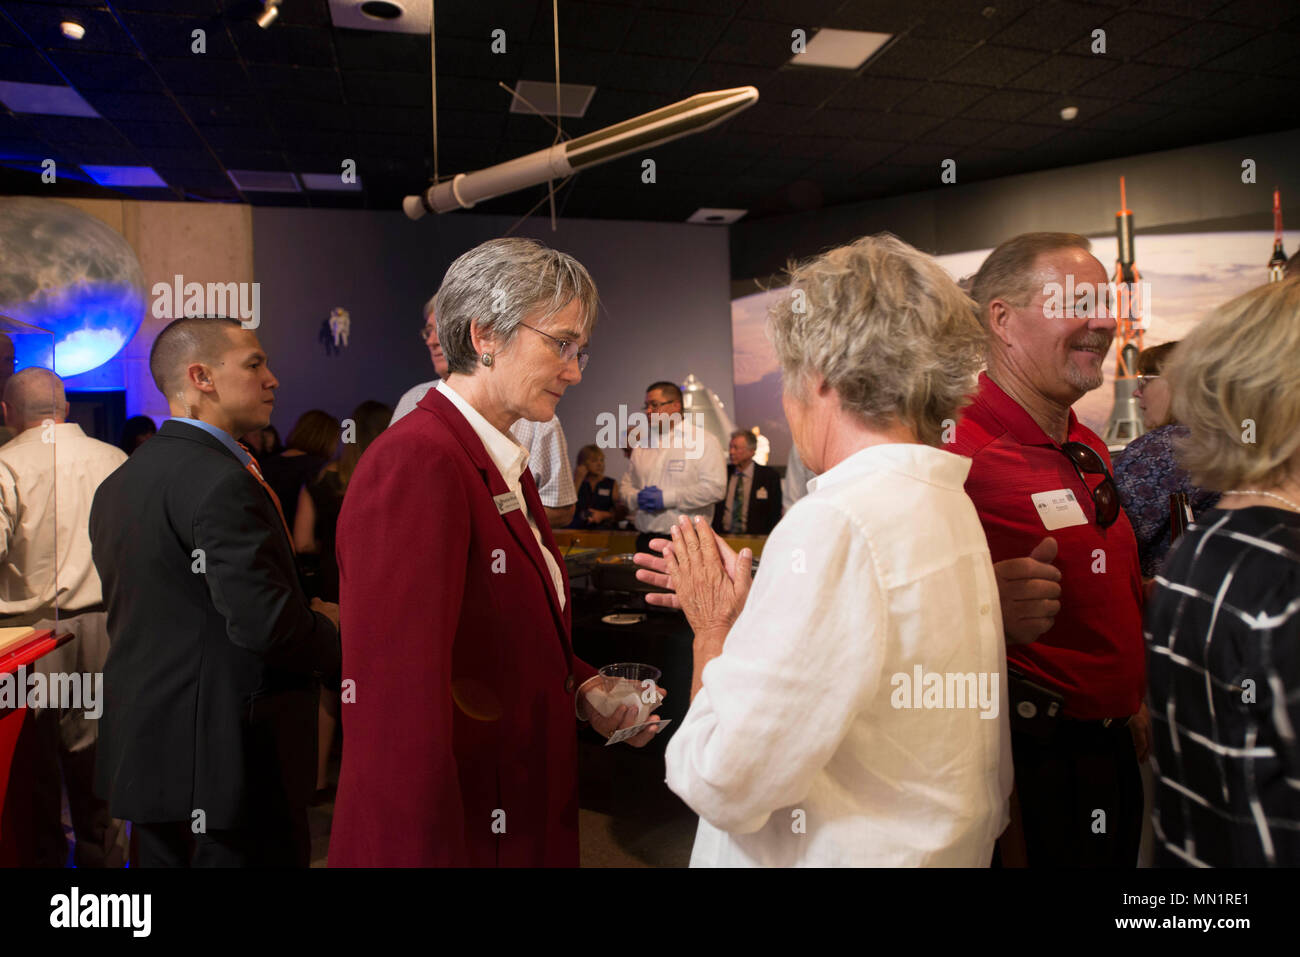 Secretary of the Air Force Heather Wilson speaks with a member of MainGate United, at the New Mexico Museum of Space history in Alamogordo, N.M., Aug. 8, 2017. Wilson came to Holloman Air Force Base and is here for a live-fly experiment with off-the-shelf aircraft. The Air Force is pursuing a Light Attack Capabilities Experimentation Campaign, which has grown out of our Close Air Support Experimentation Campaign. The Campaign is being led by the Air Force Strategic Development Planning and Experimentation Office under Air Force Materiel Command. (U.S. Air Force photo by Tech. Sgt. Amanda Junk) Stock Photo